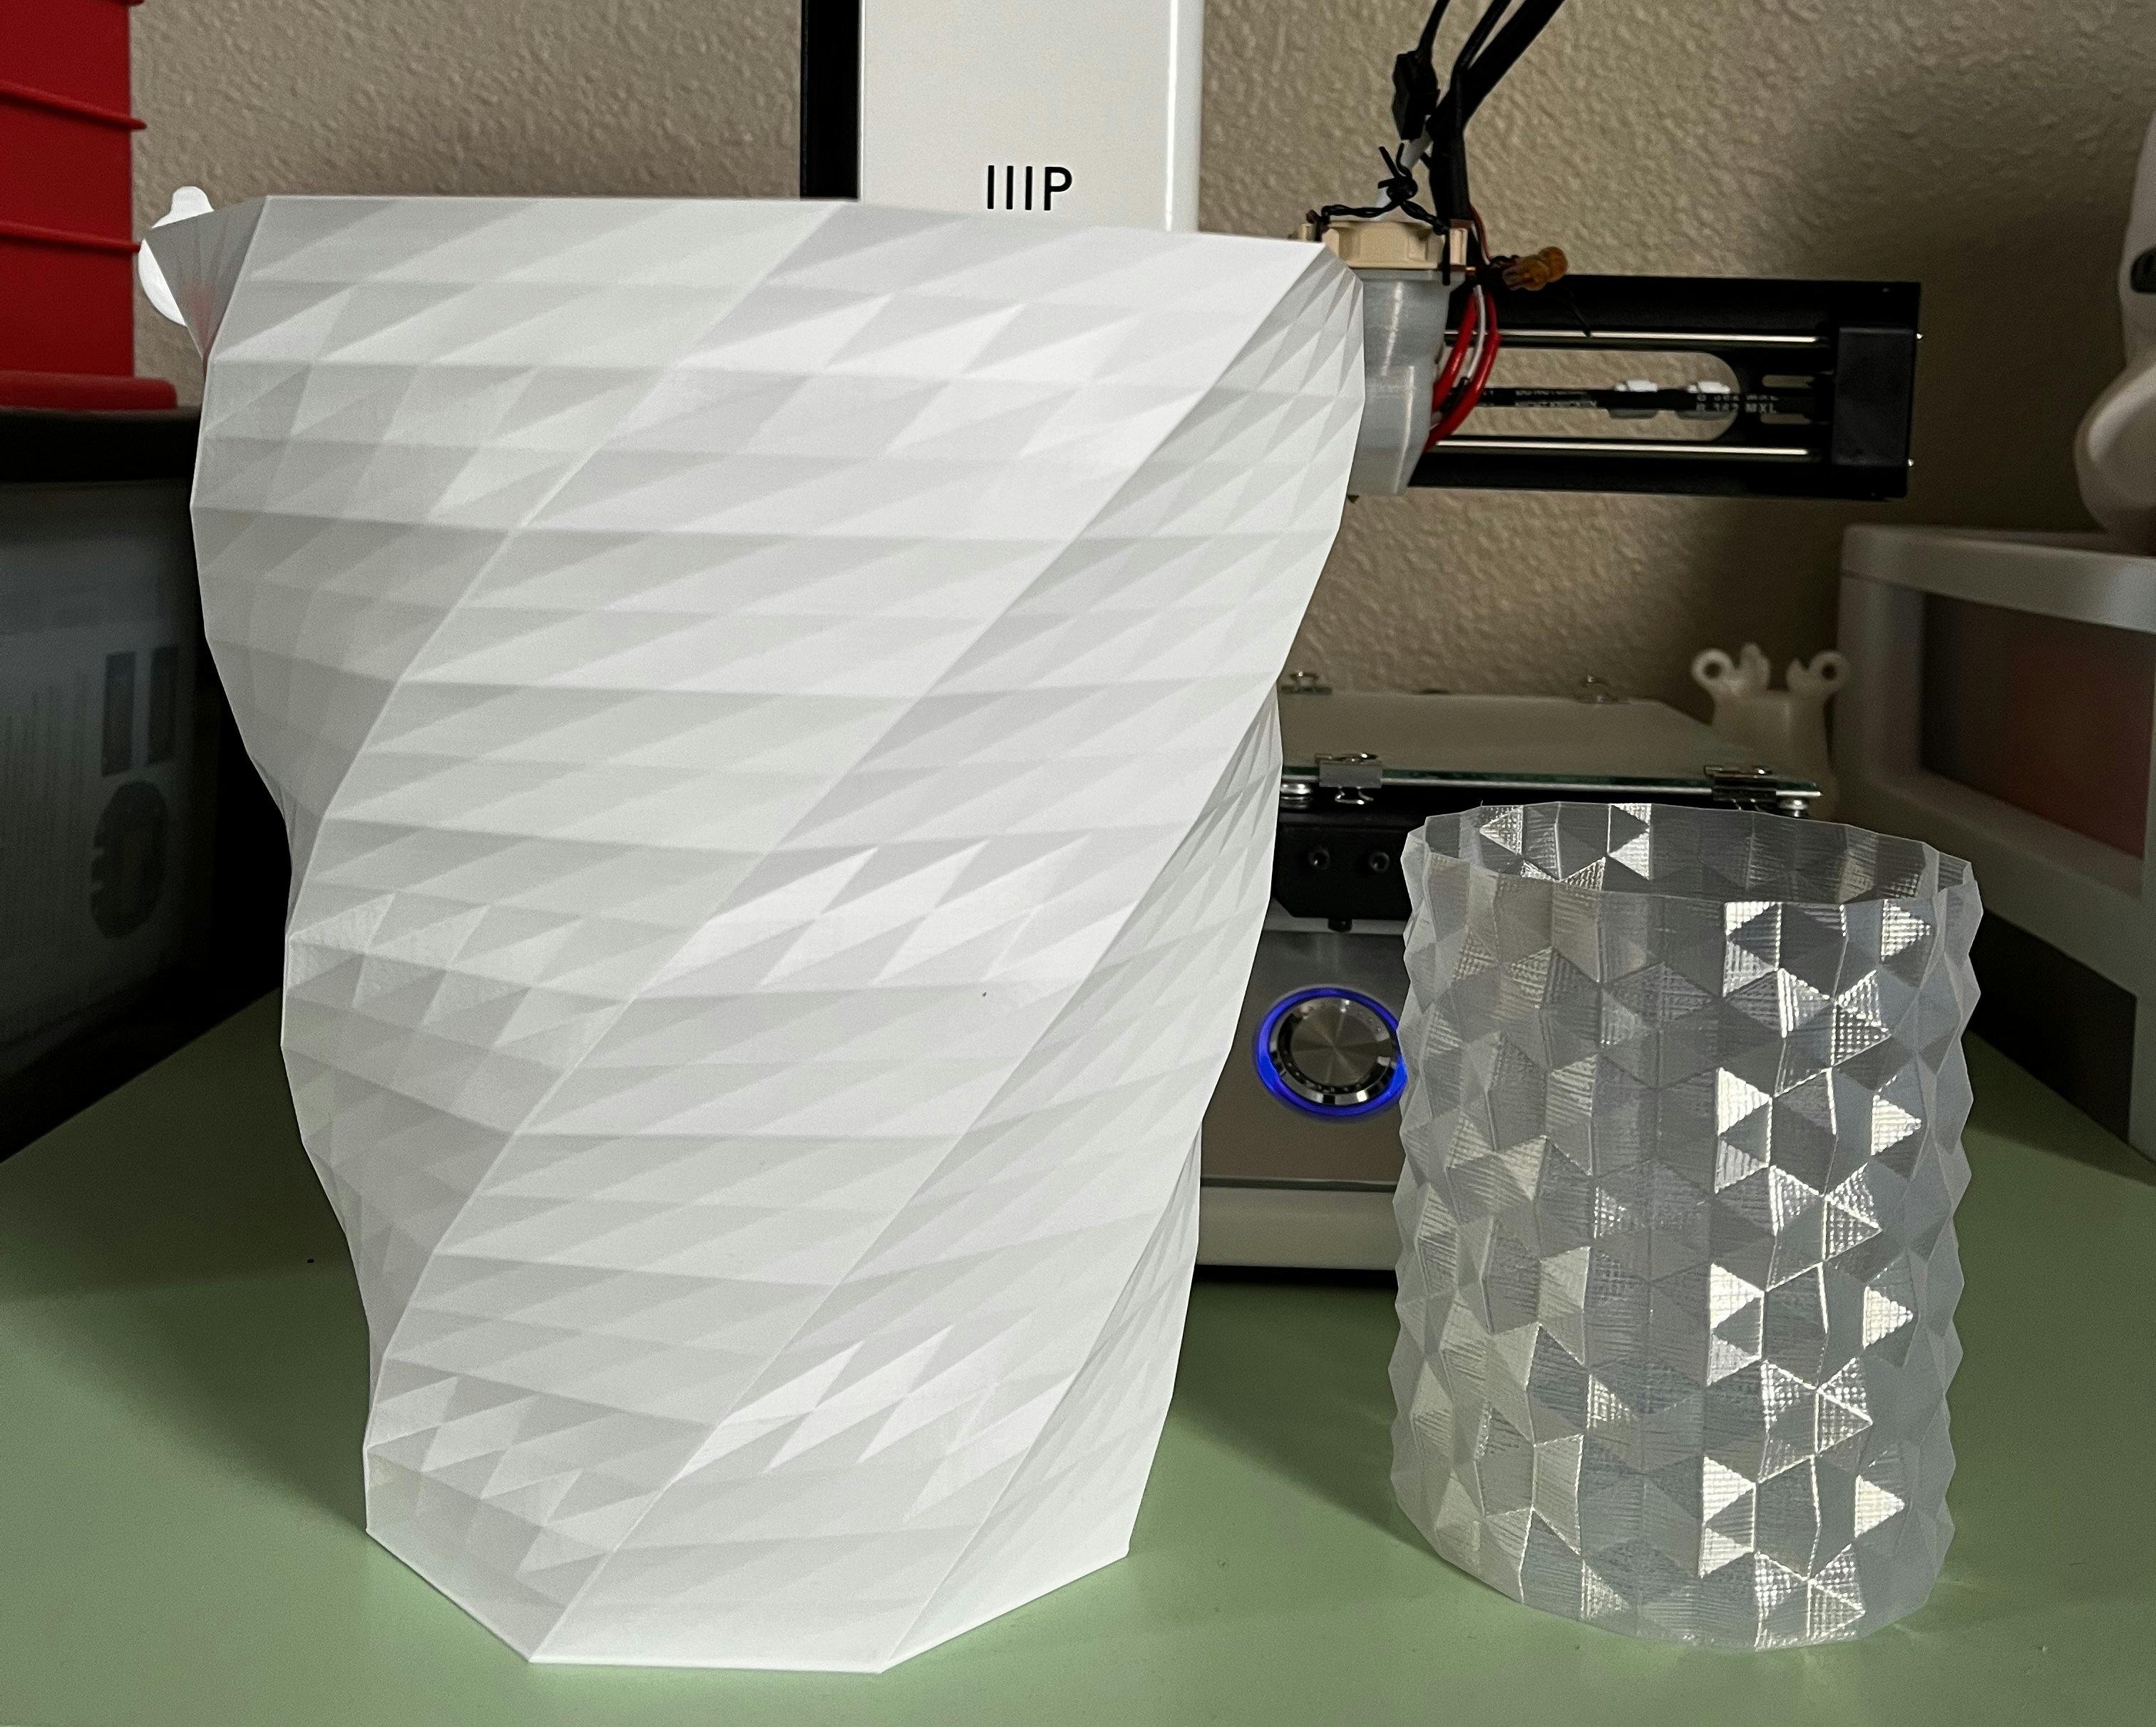 Two 3D printed vases, one larger than the other